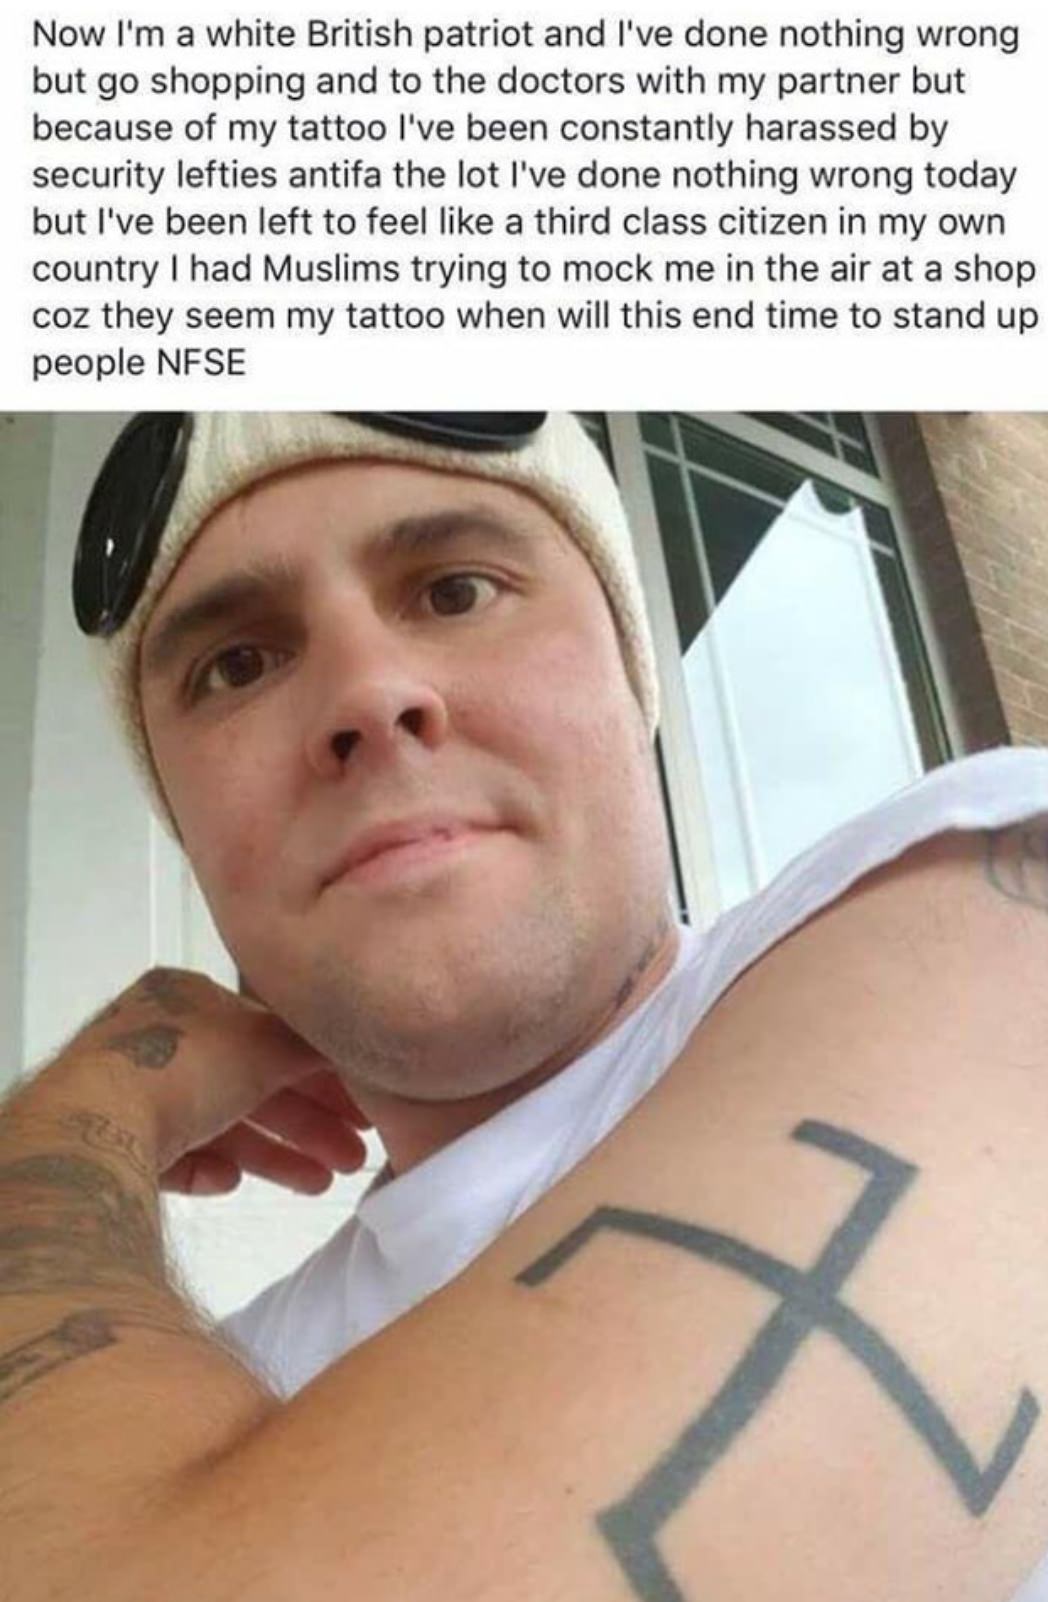 cringe facepalm nazi - Now I'm a white British patriot and I've done nothing wrong but go shopping and to the doctors with my partner but because of my tattoo I've been constantly harassed by security lefties antifa the lot I've done nothing wrong today b